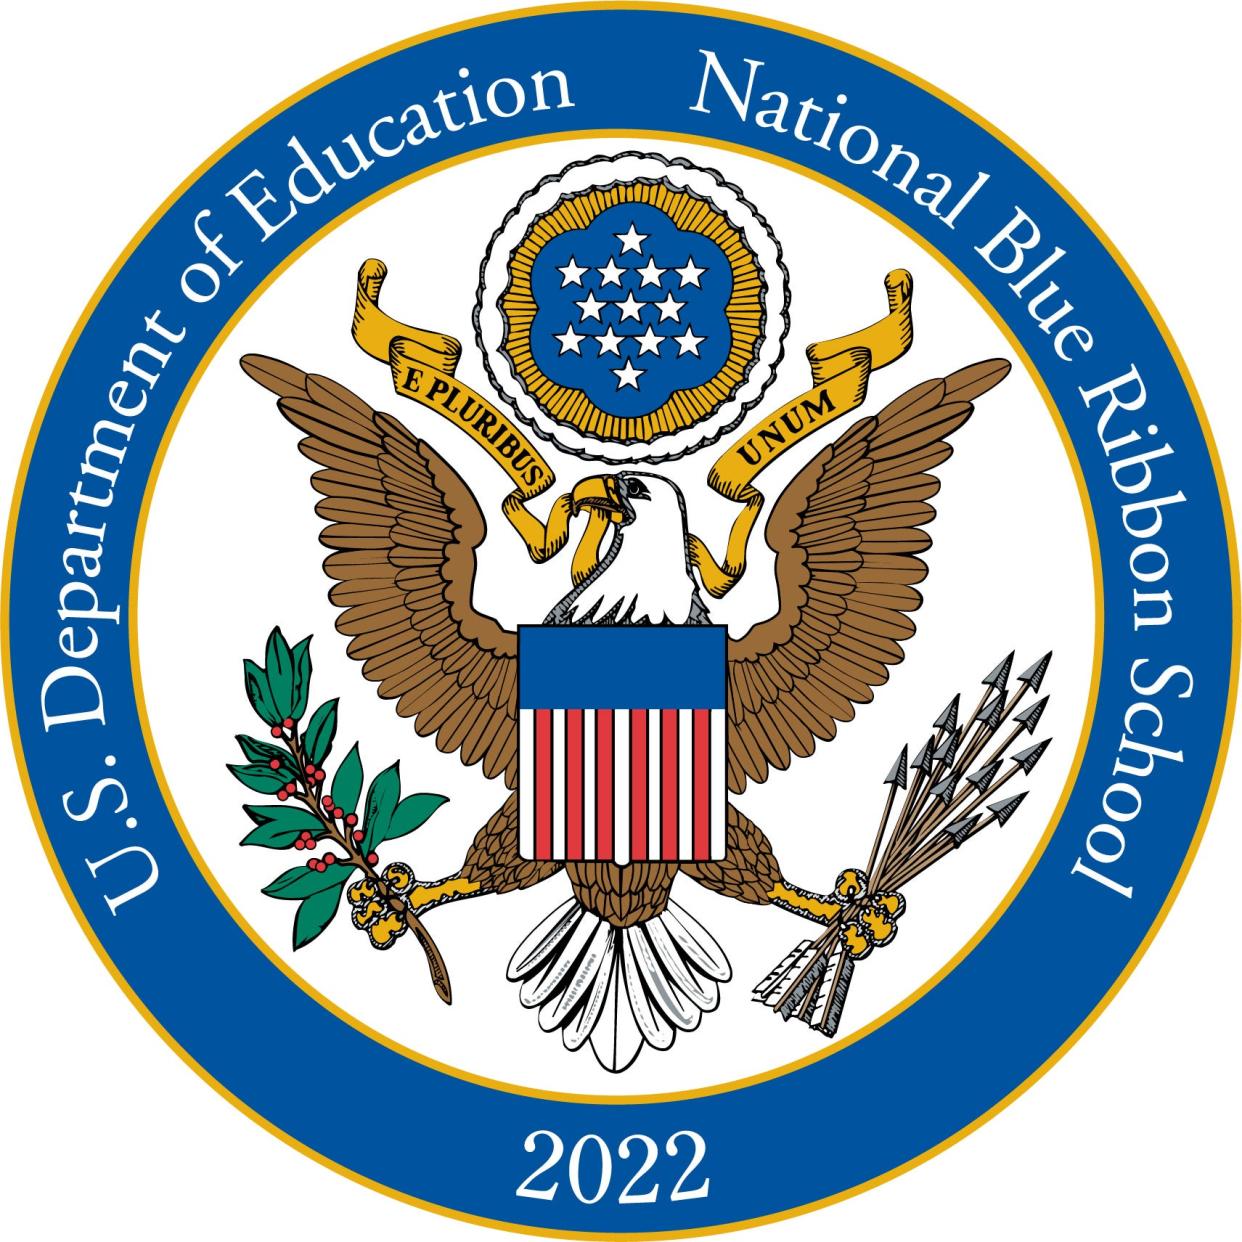 A group of San Bernardino County-based schools were among 297, including 29 schools in California, that were recognized as National Blue Ribbon Schools.